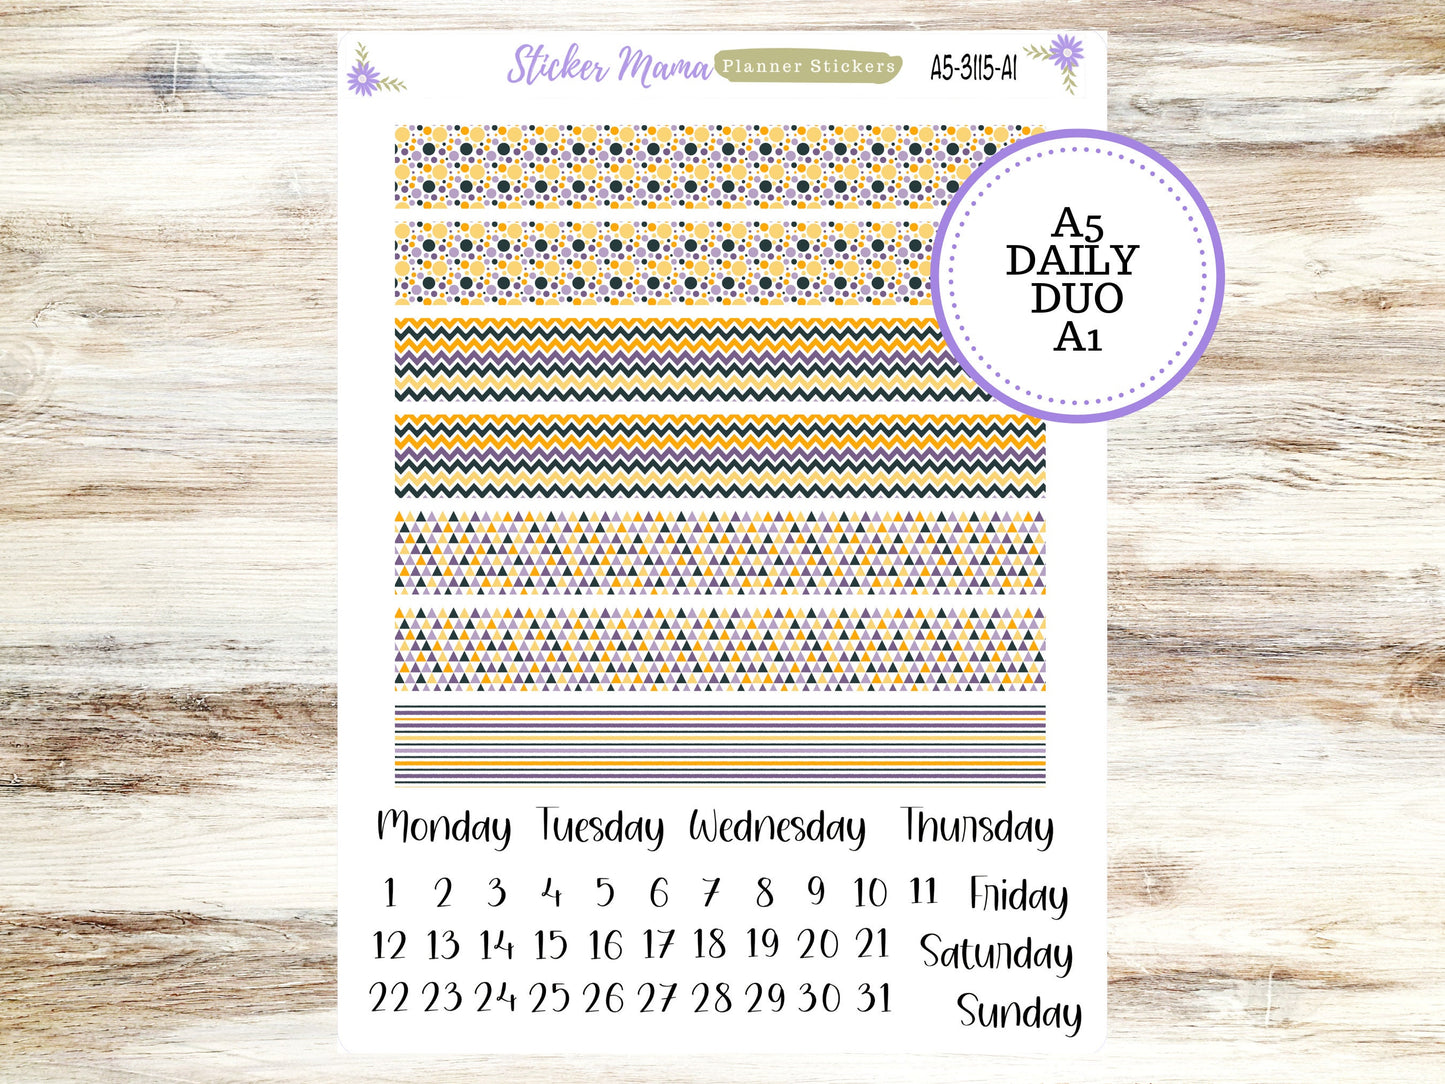 A5-DAILY DUO-Kit #3116  || Pumpkin Spice  || Planner Stickers - Daily Duo A5 Planner - Daily Duo Stickers - Daily Planner